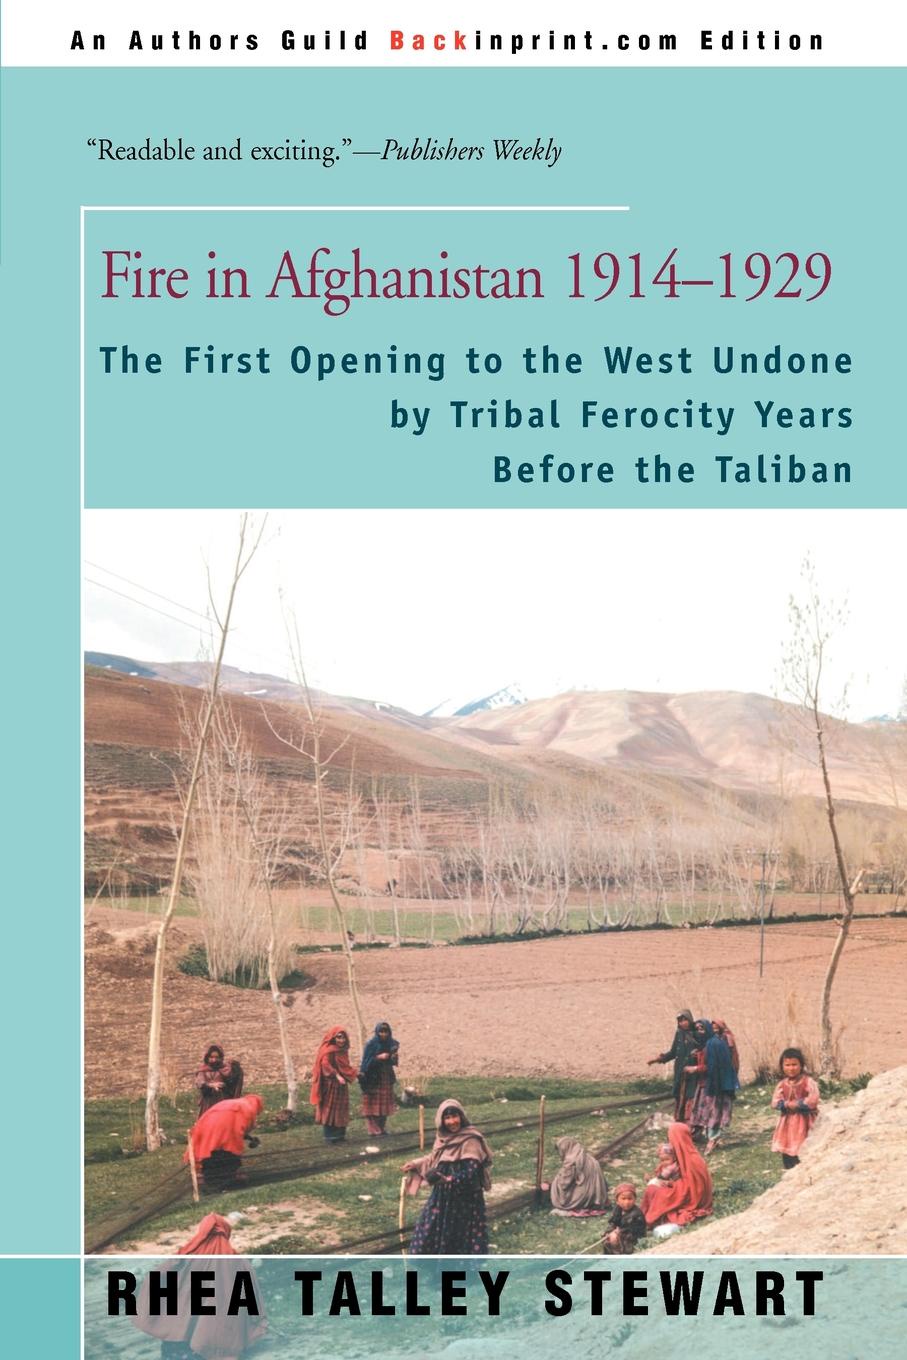 Fire in Afghanistan 1914-1929. The First Opening to the West Undone by Tribal Ferocity Years Before the Taliban